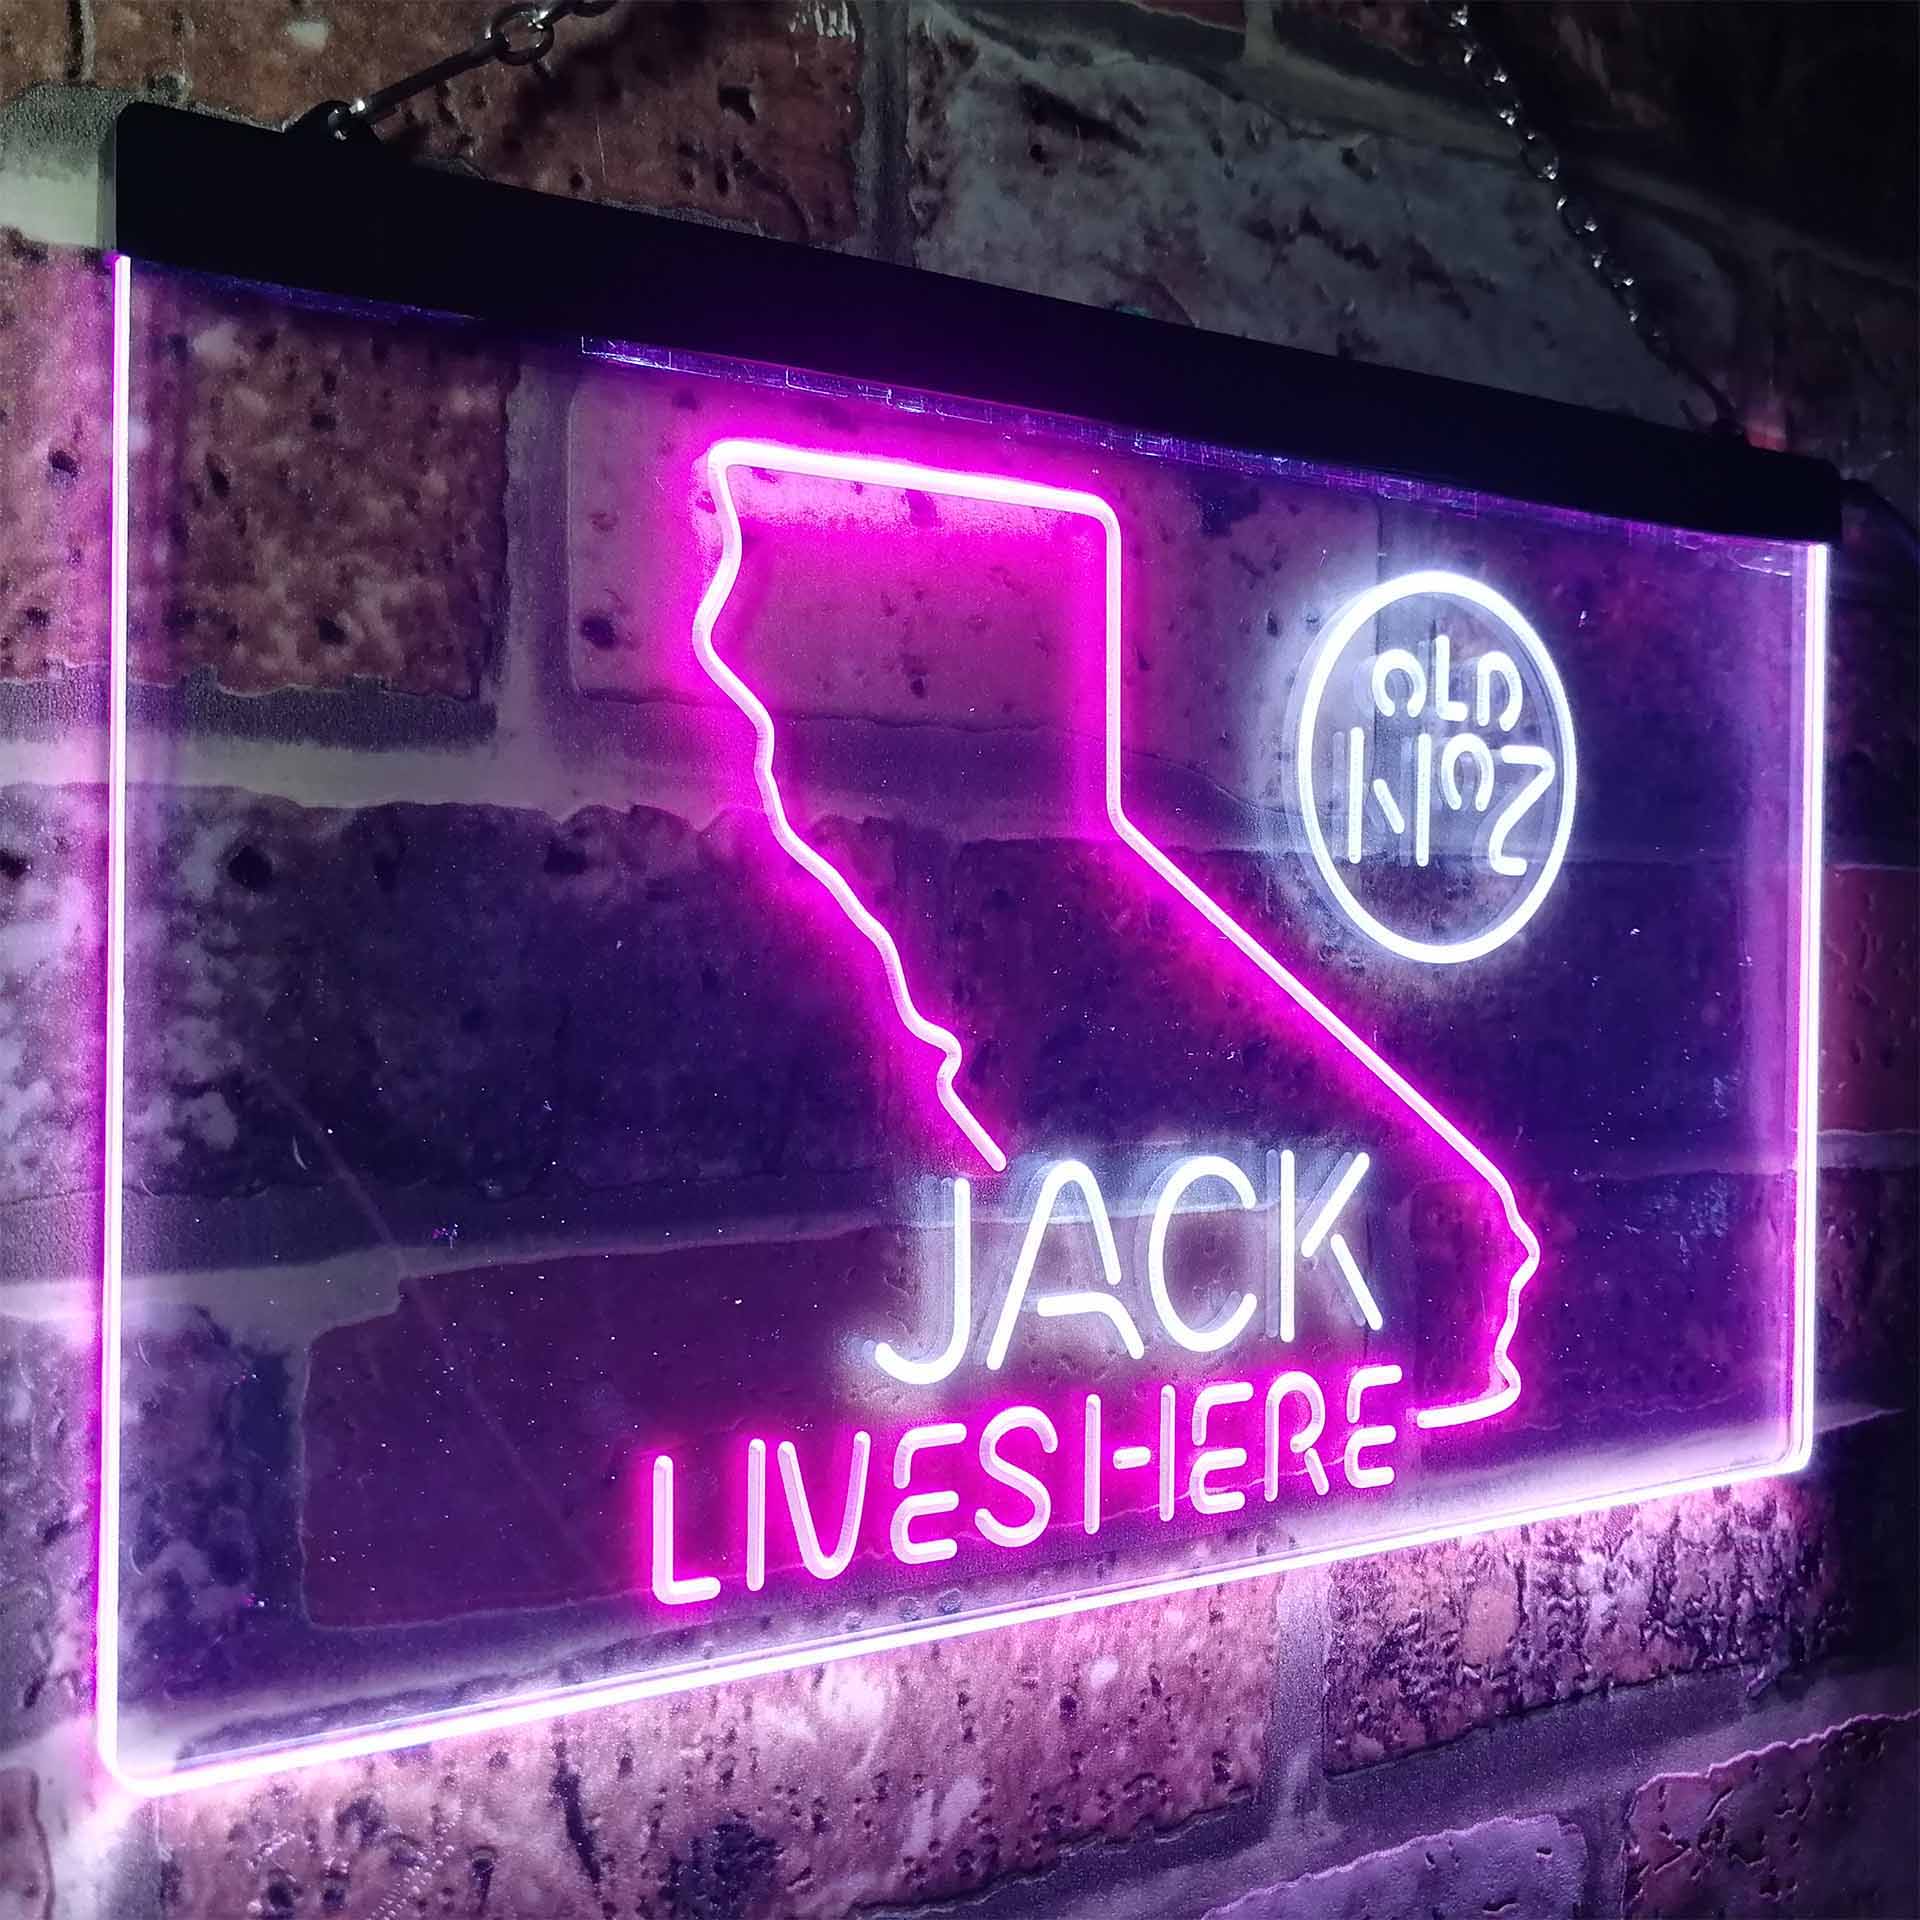 California Jack Lives Here Man Cave Led Neon Light Decoration Gifts Neon LED Sign